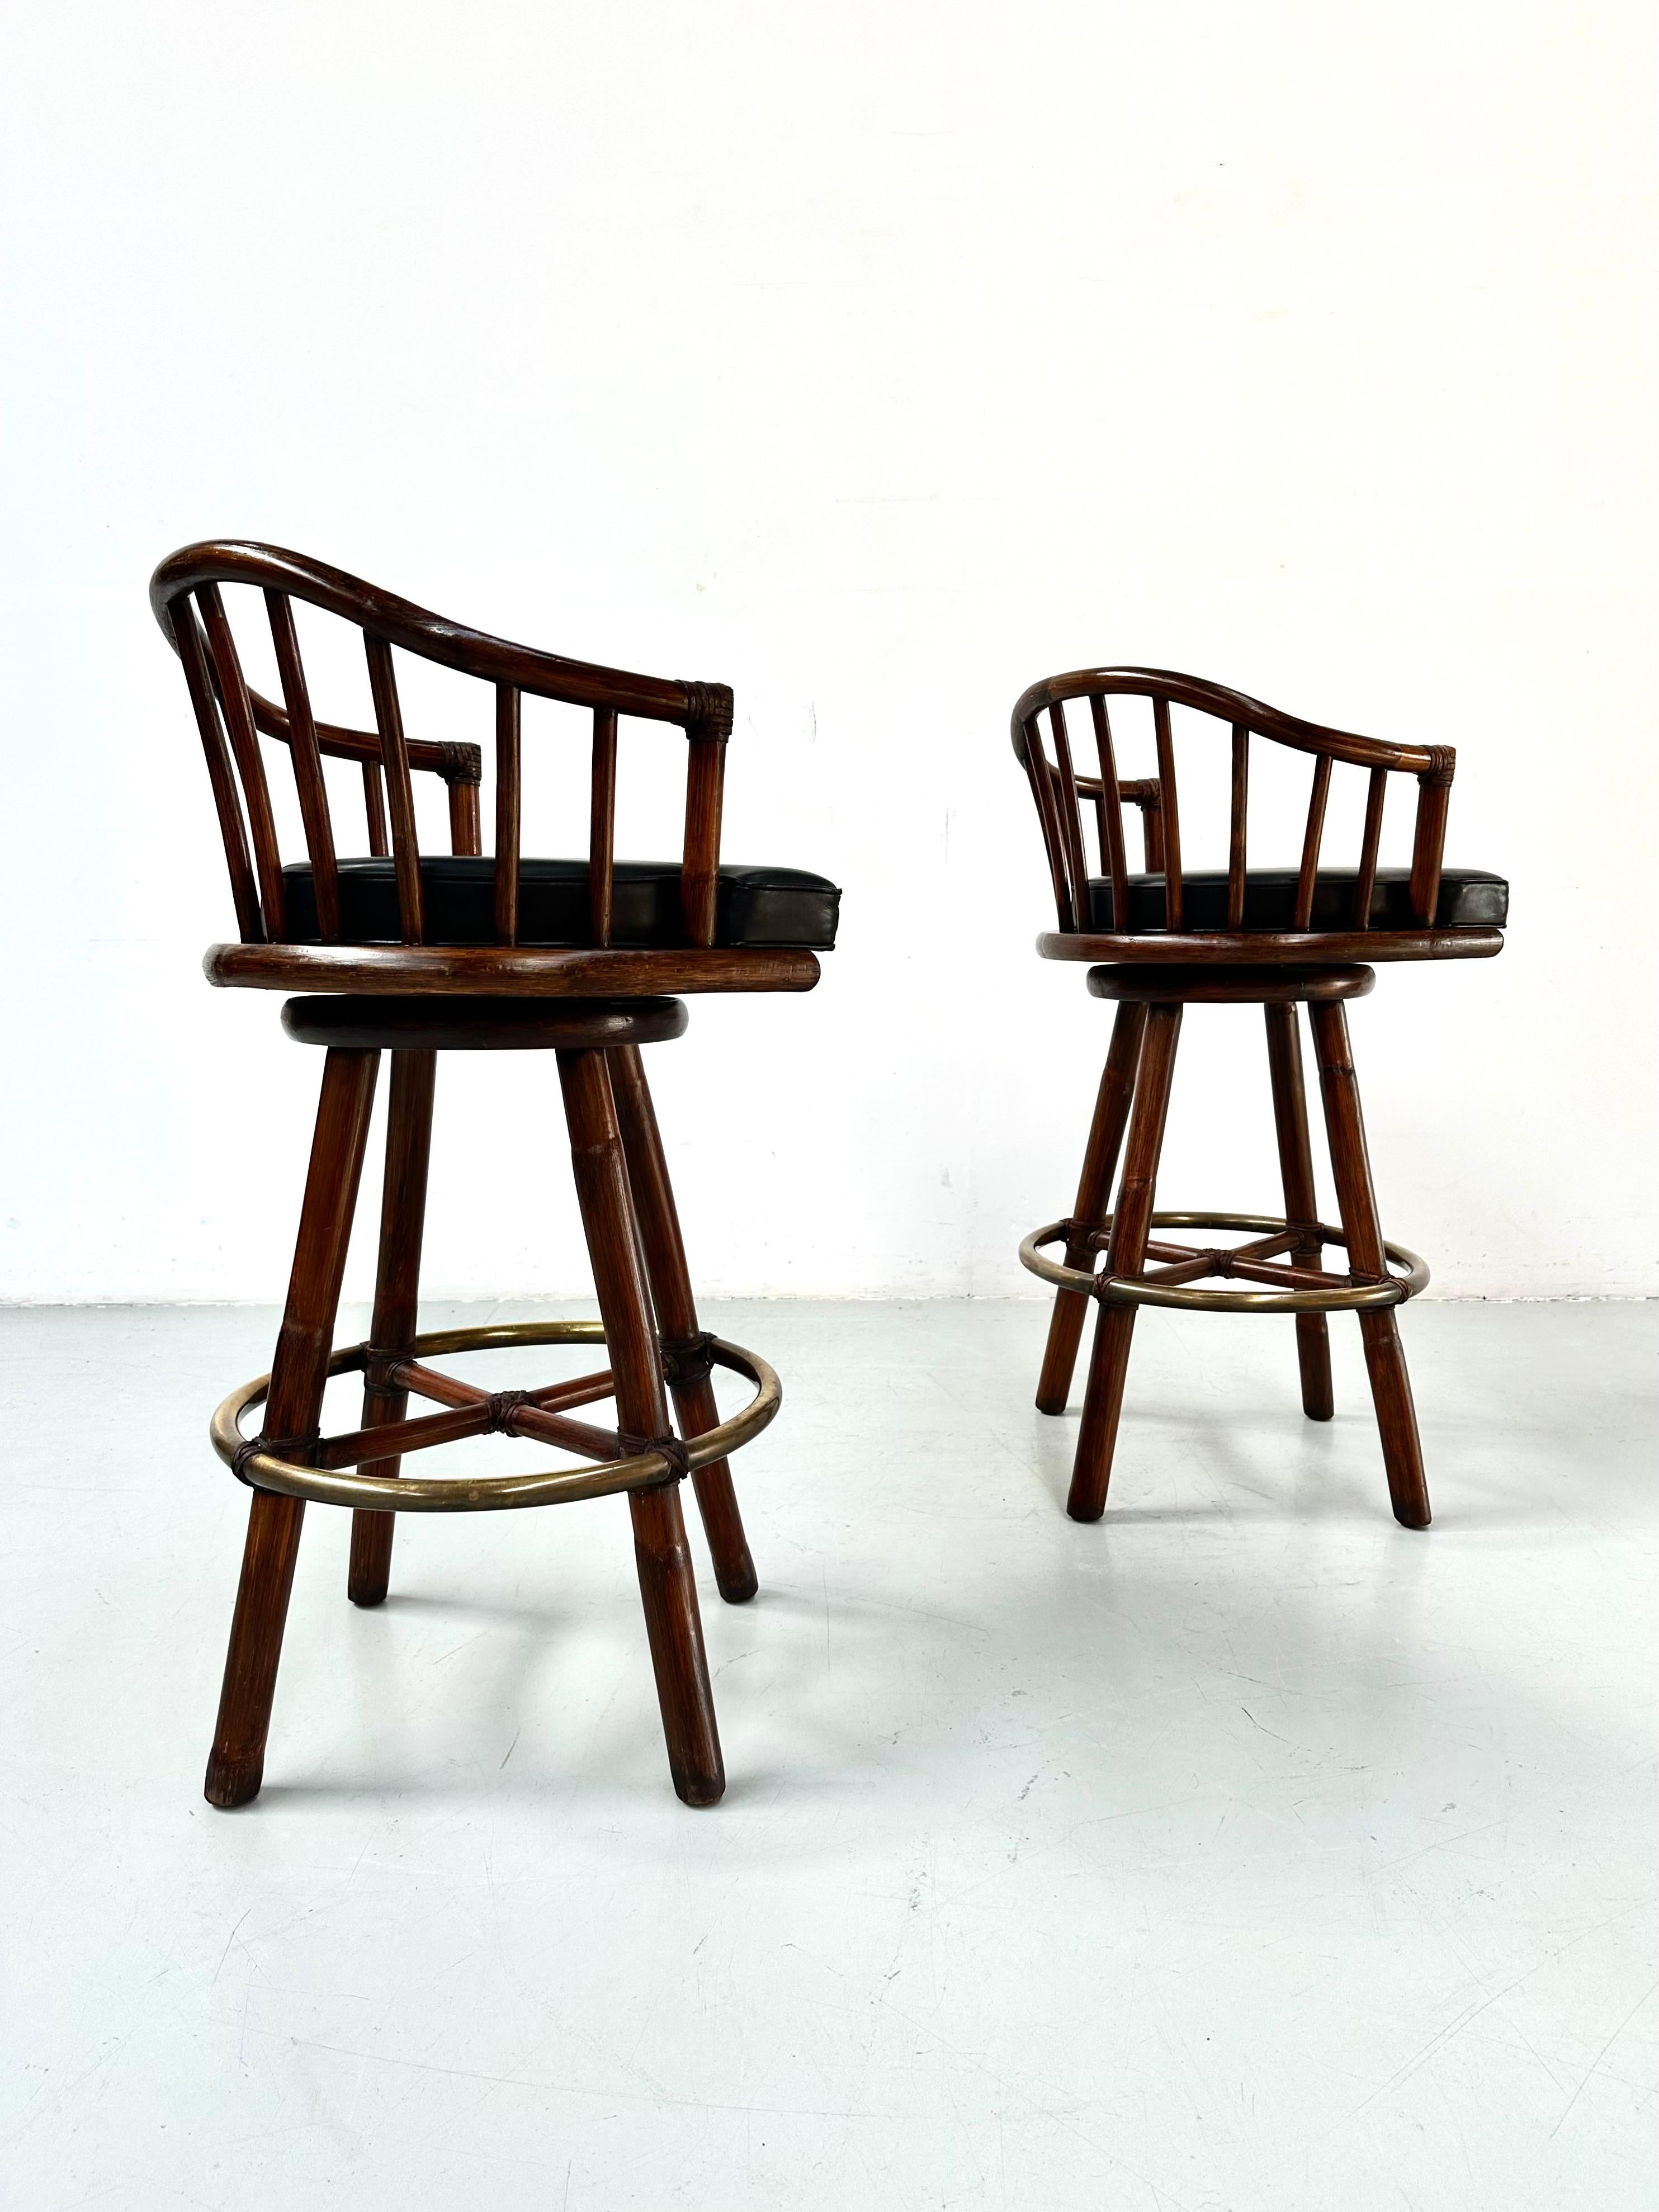 A great pair of bamboo and Brass barstools designed by the Dutchman Hans Kaufeld  for McGuire in the seventies. Featuring swivel leather covered seats. These barstools are made with the famous McGuire rawhide strapping and Classic brass foot rail. 

